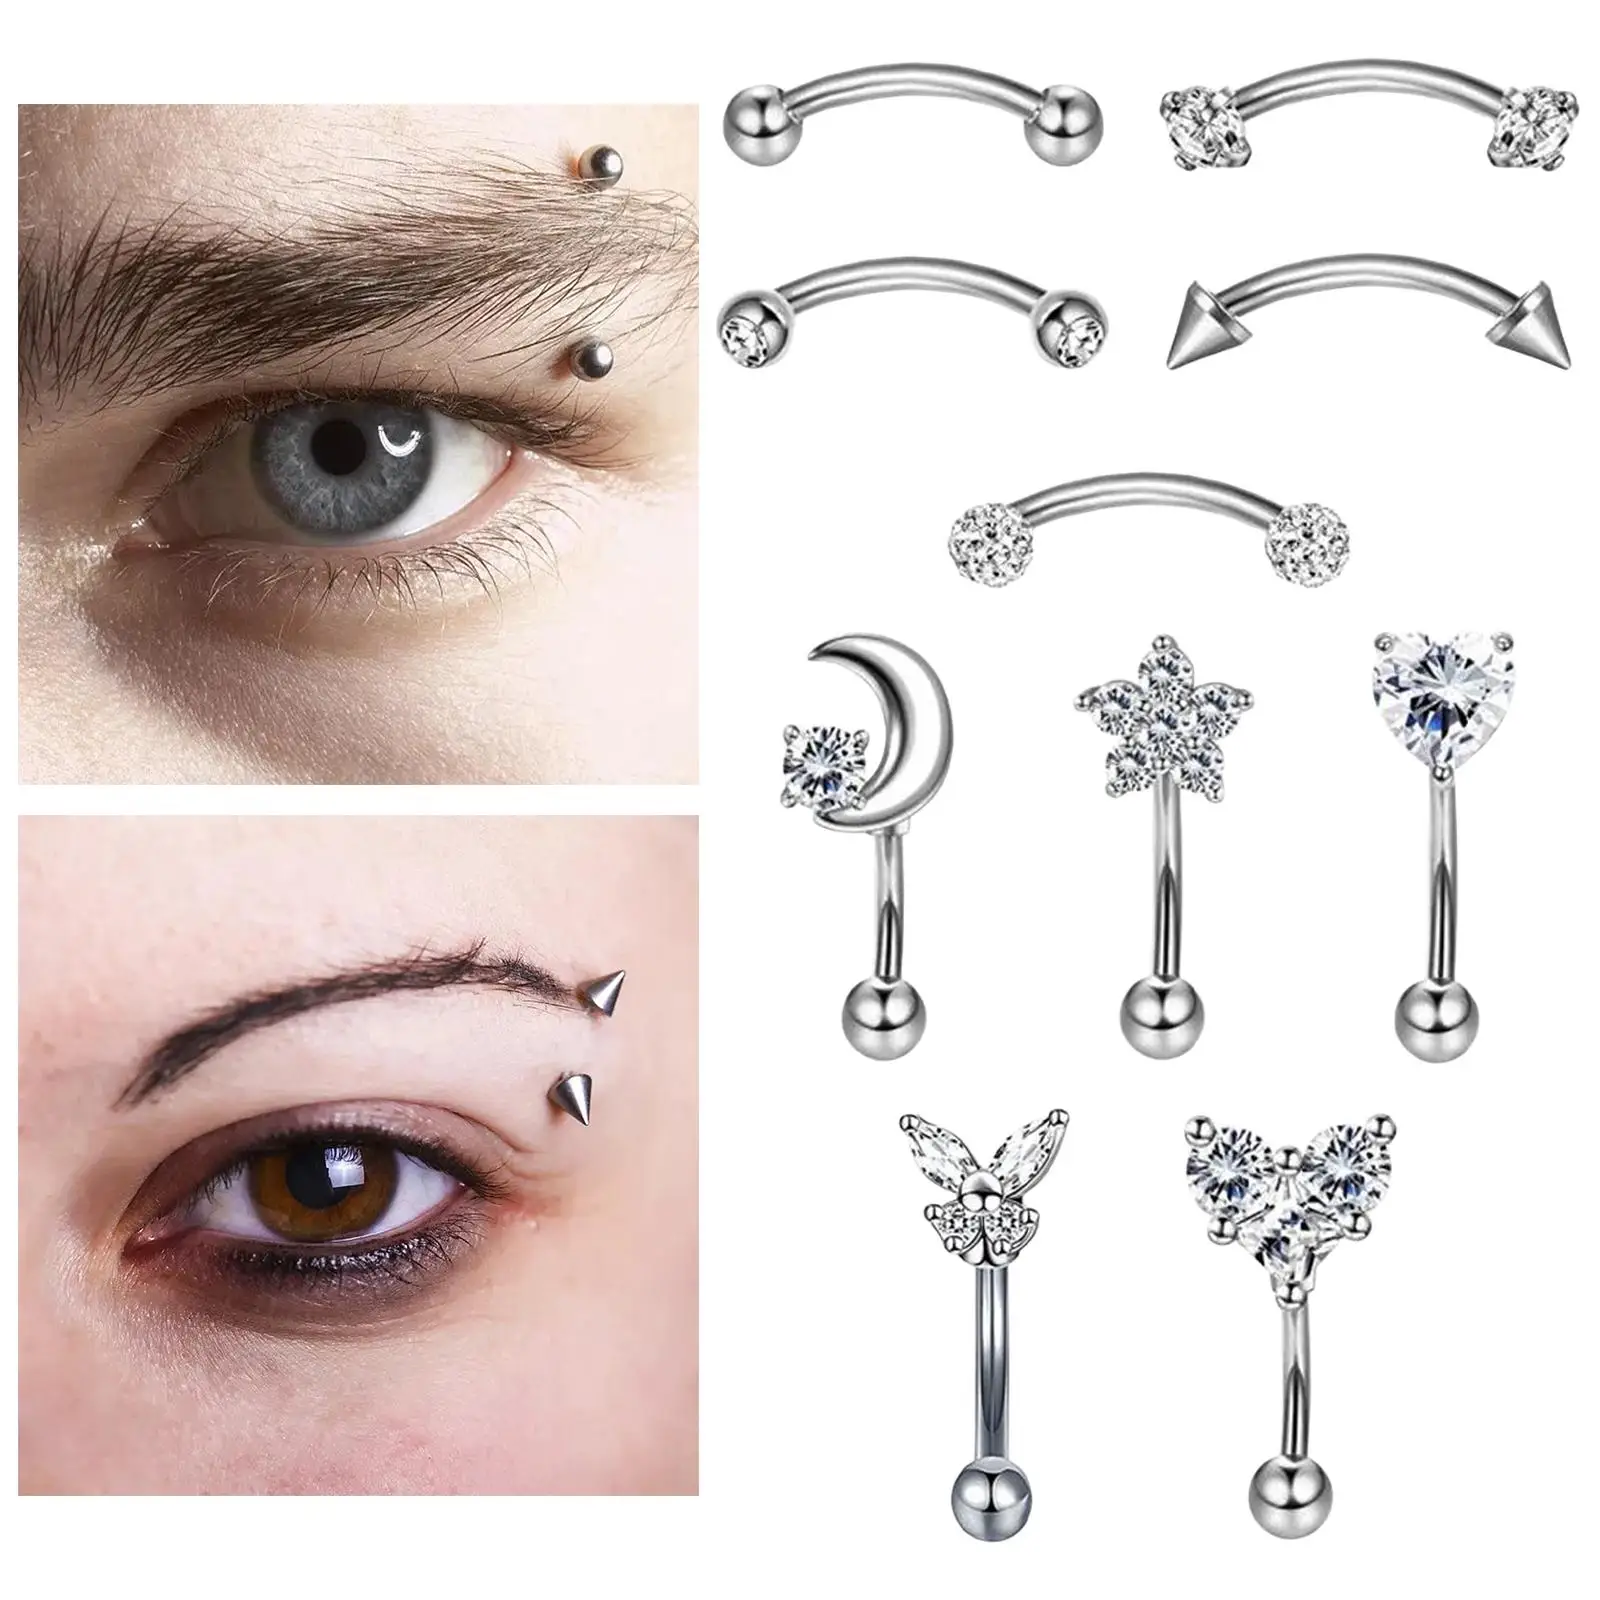 10x Stainlee Steel Nose Ring Eyebrow Lip Studs Earring Mix Styles Diamond Stud Earrings Bar Punk Fashion Butterfly Tragus Stud